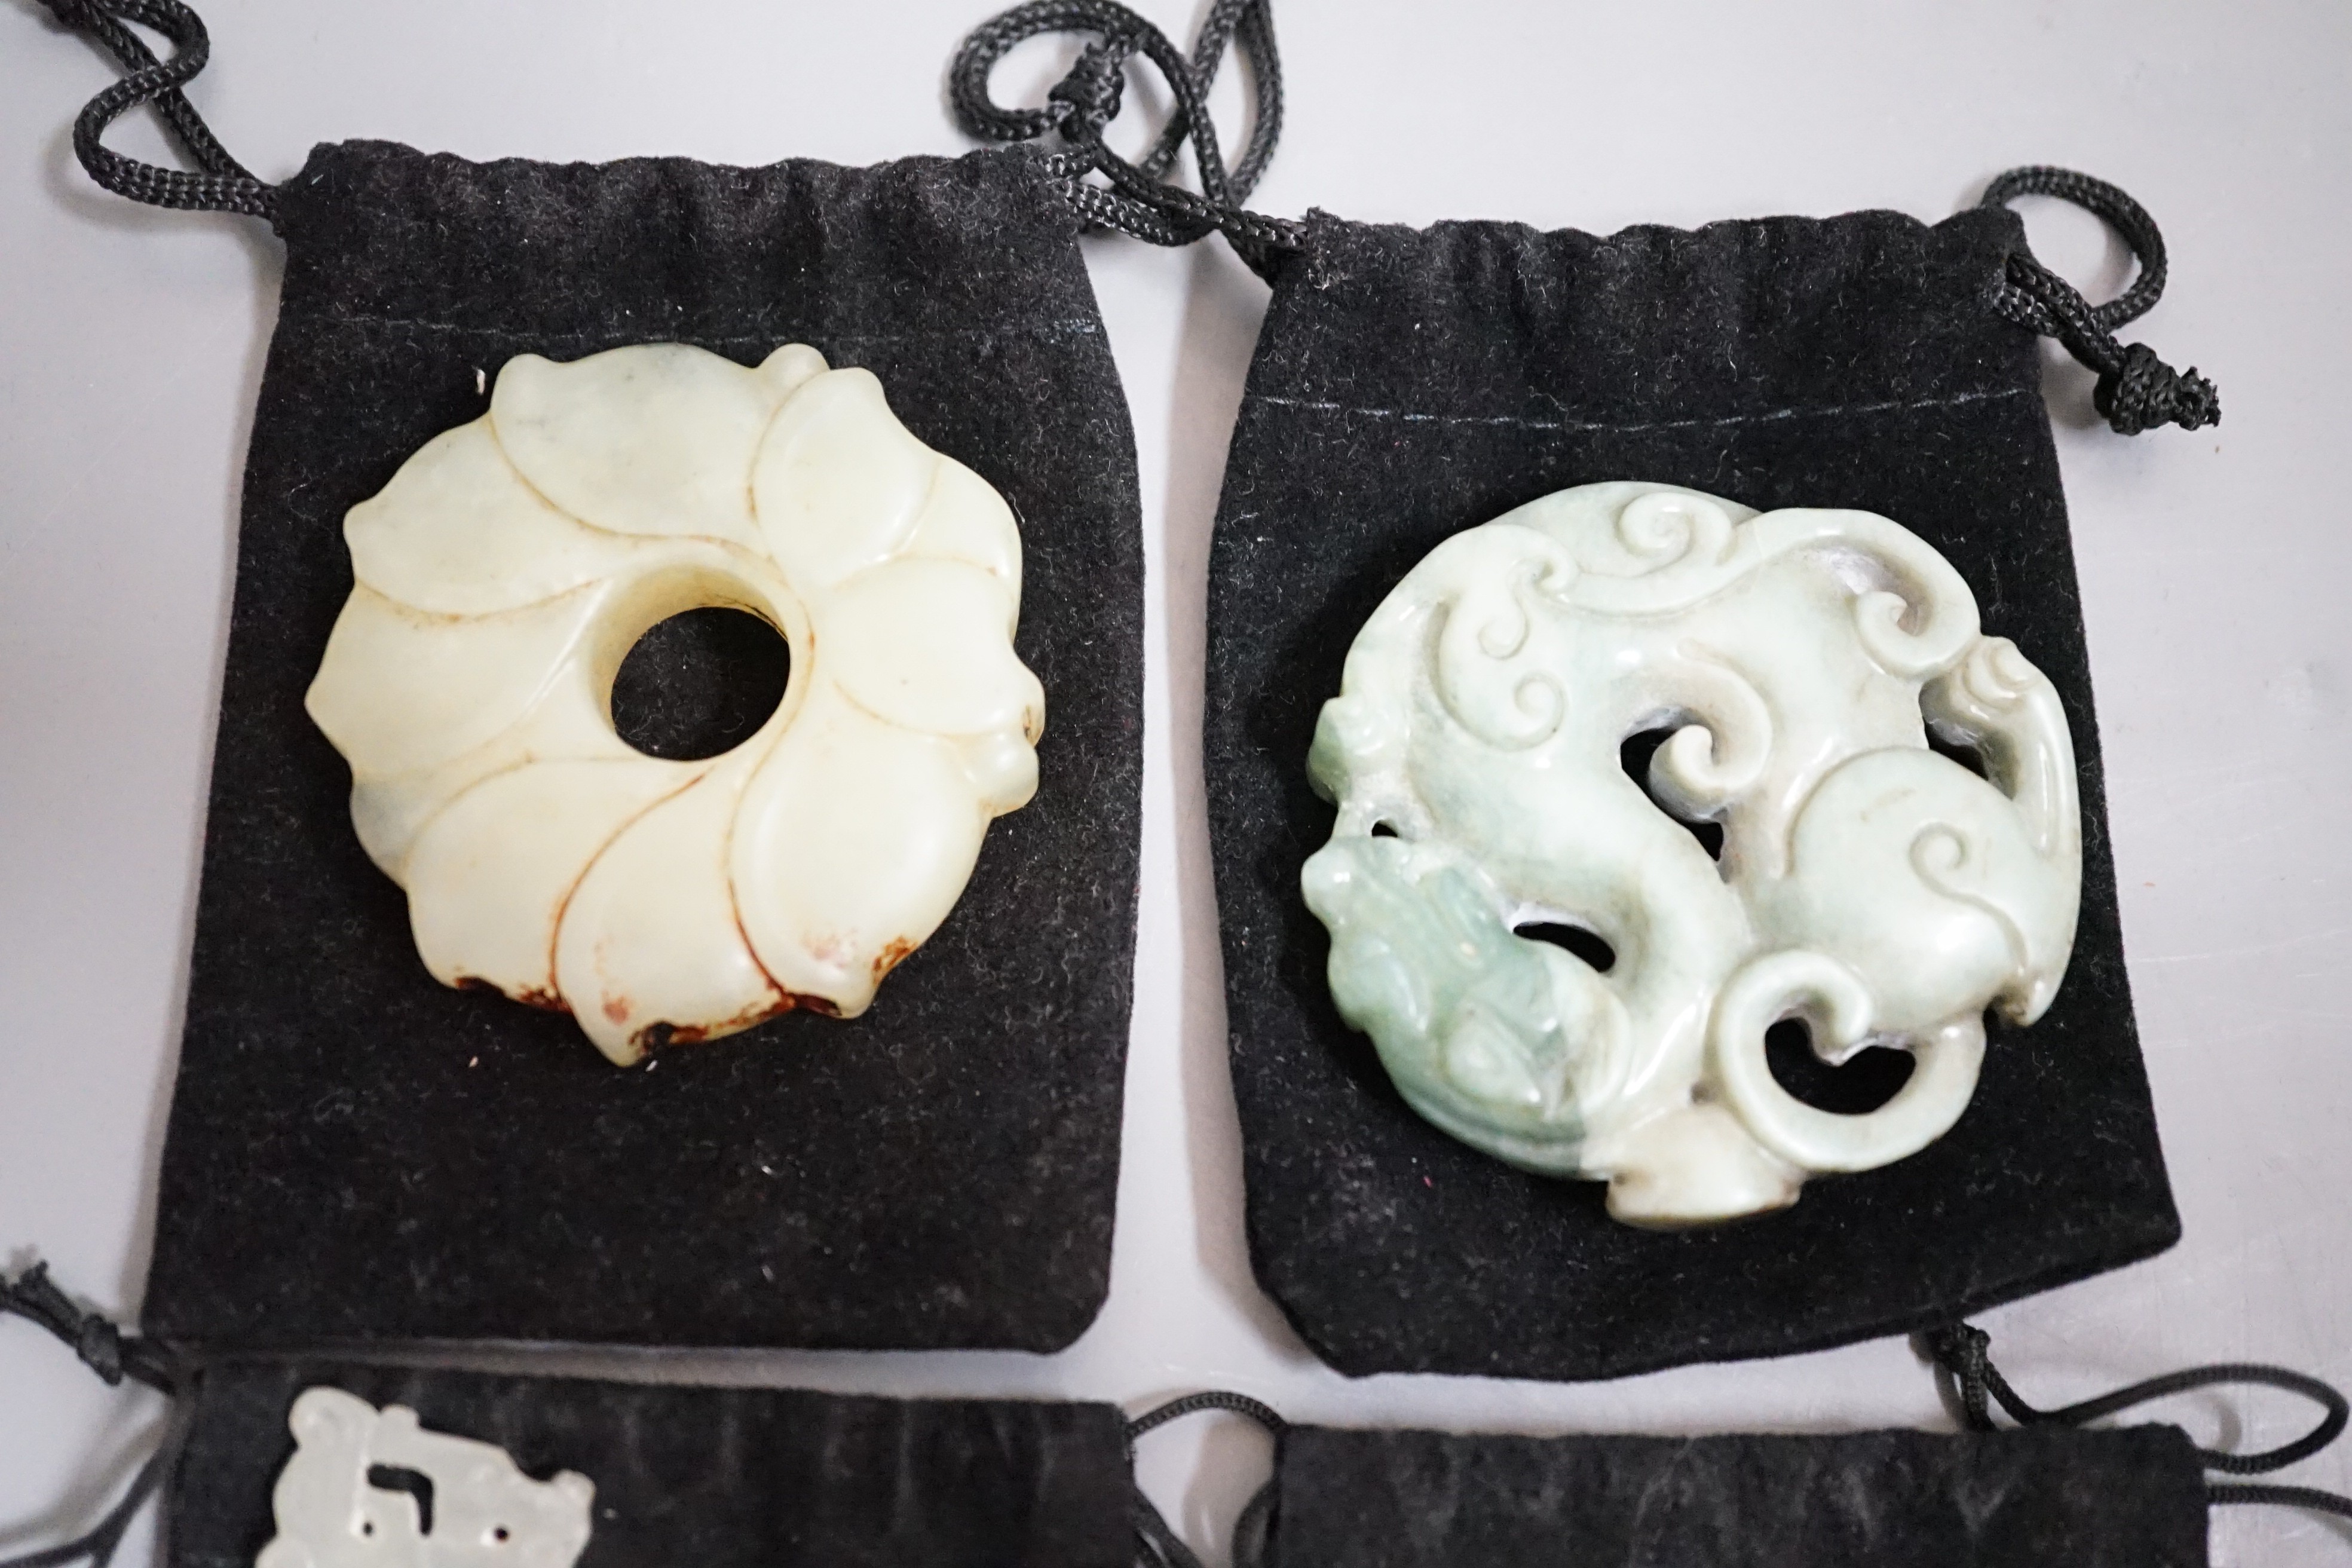 Three Chinese jade celadon roundels/pendants and a huang plaque, carved dragon roundel 5.5 cms diameter (4)